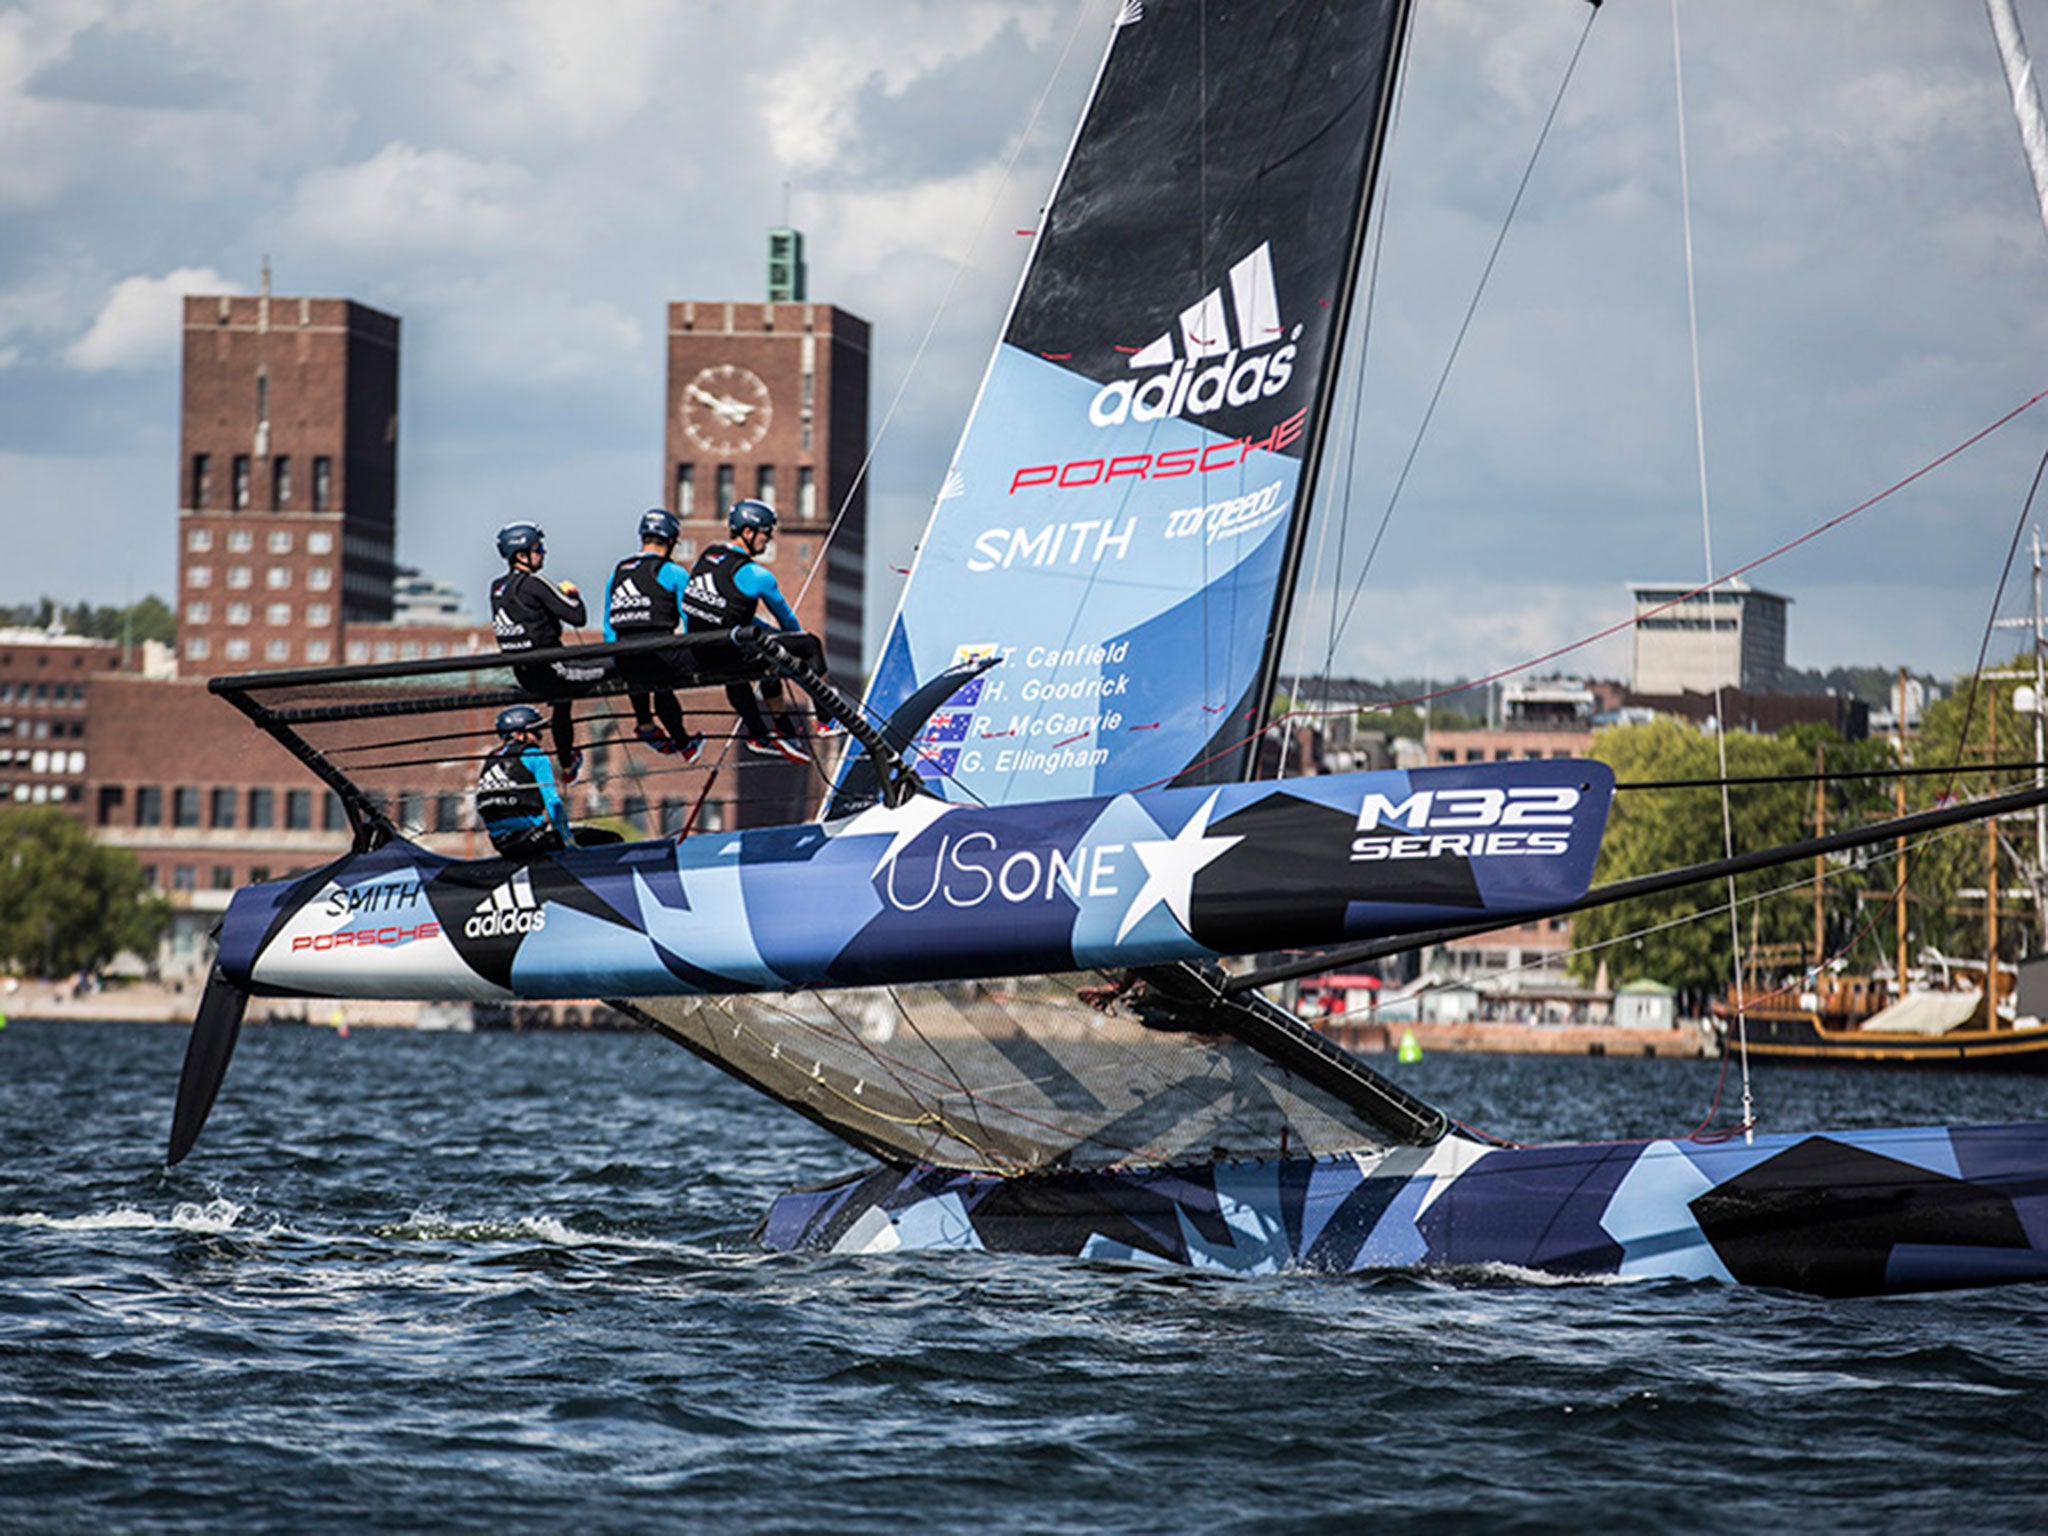 The M32 catamaran, which becomes the weapon of choice for the World Match Racing Tour, shows of its paces in Gothenberg